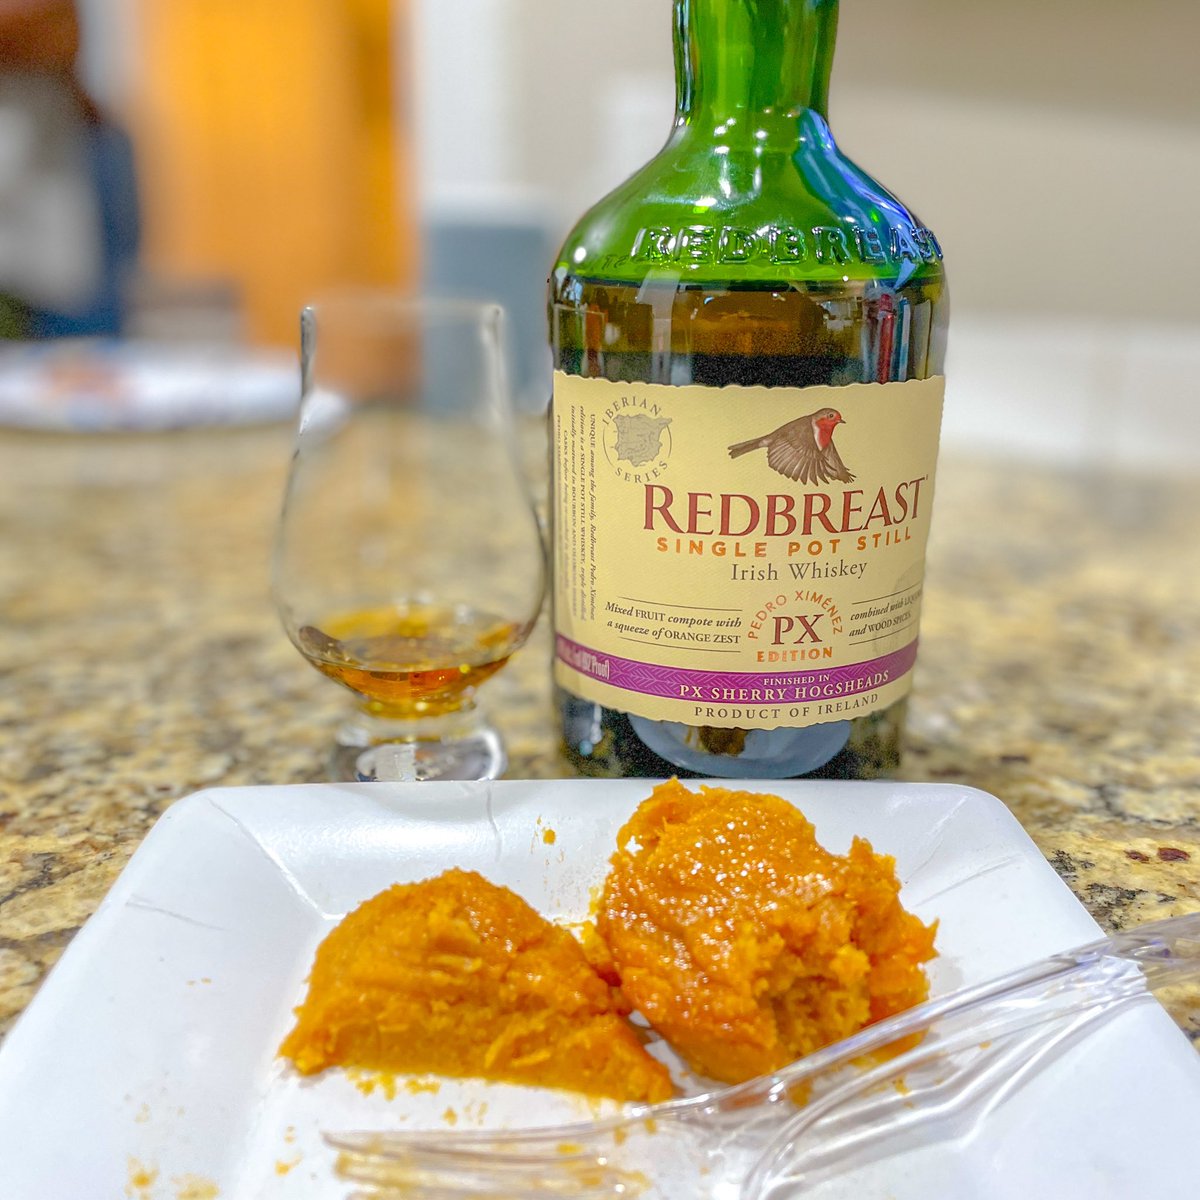 What’s in your glass? Tonight! Sweet potato corn bread and @RedbreastUS PX finish!!